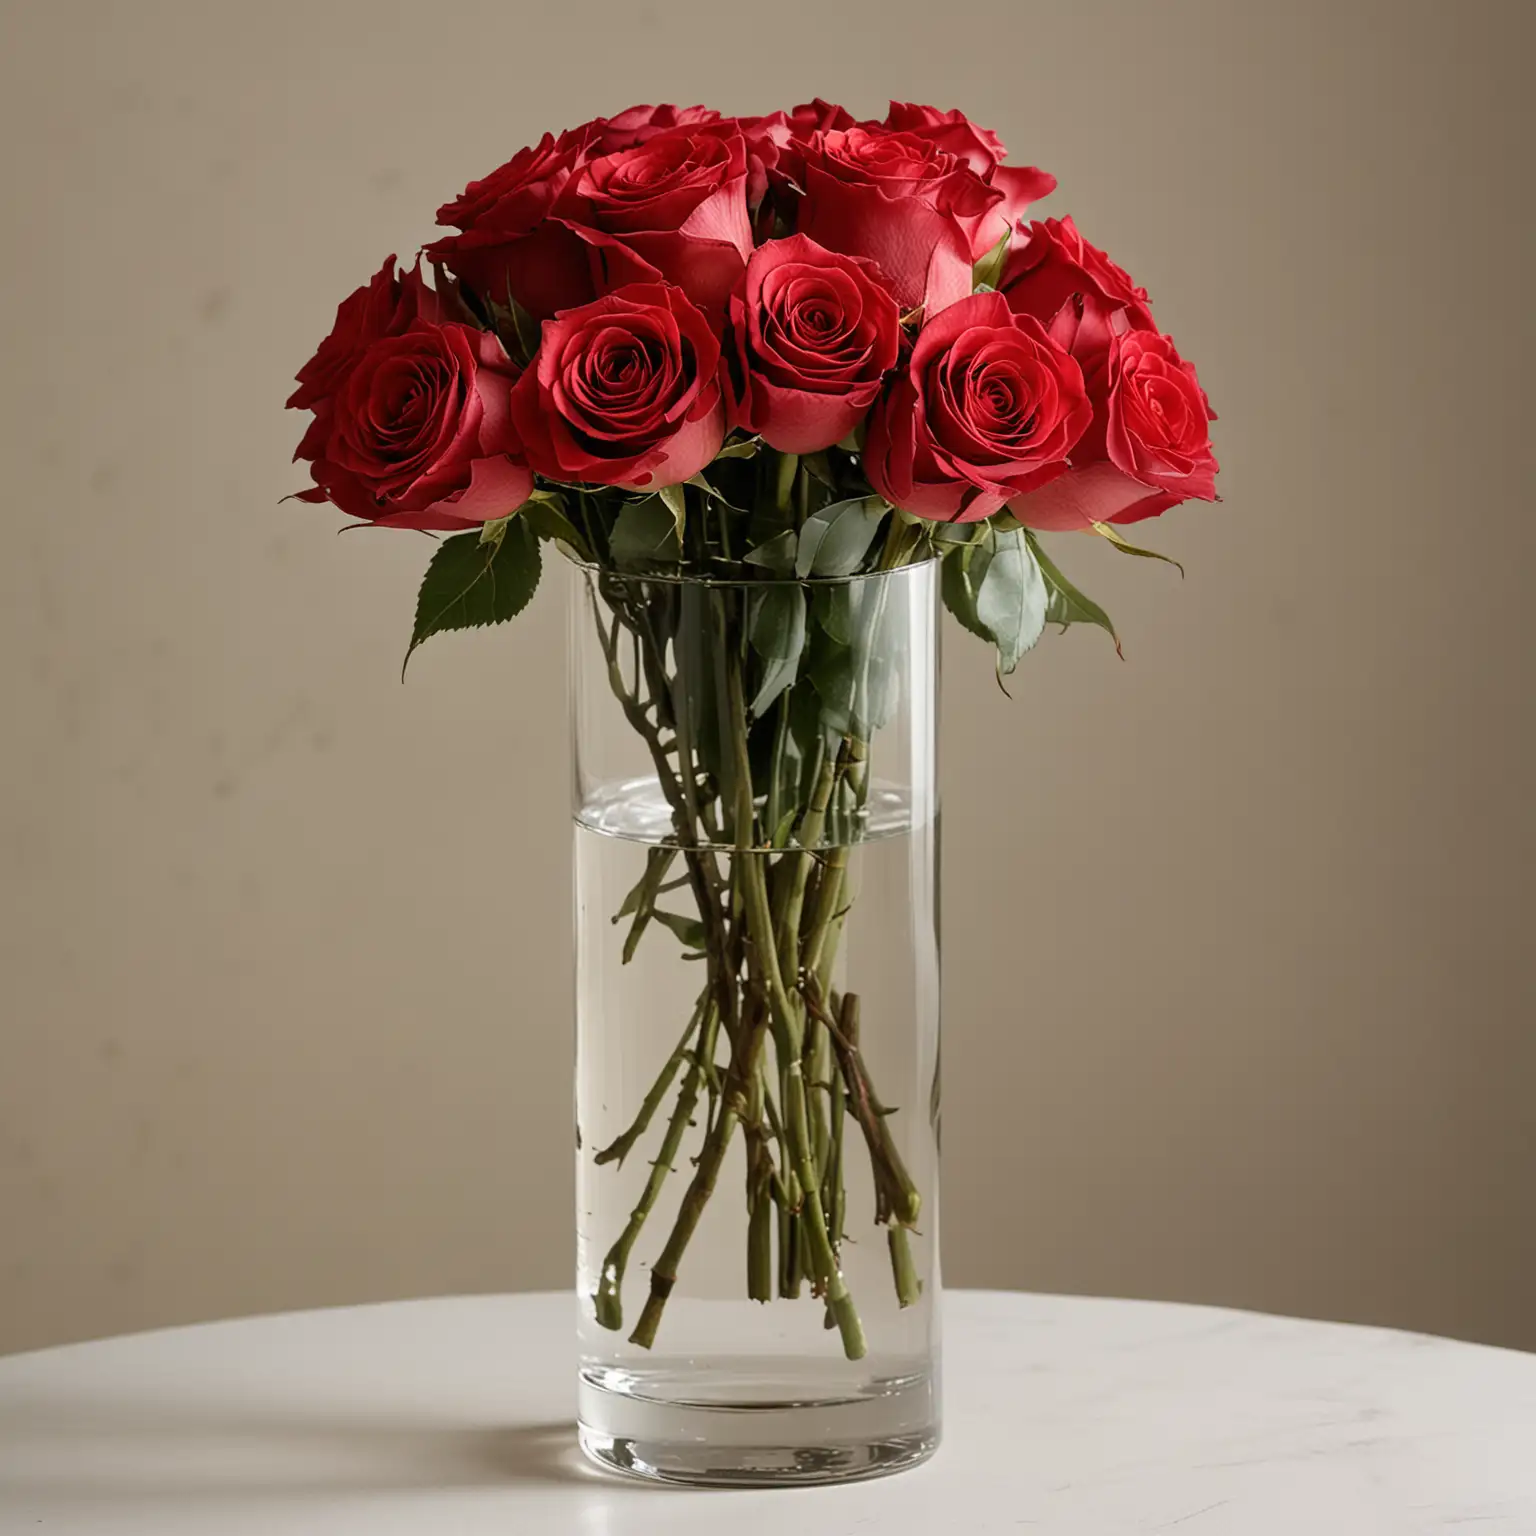 Vase Description:
Please design a short cylinder glass vase filled with red roses for an elegant and simple wedding centerpiece.
The base of the vase should have a stable, flat surface.
Rose Arrangement:
Fill the vase with fully bloomed red roses for an elegant look. do not add any other colors or flowers.
Arrange the red roses in a tight cluster within the vase.
Aim for a balanced arrangement with the roses evenly spaced and facing upward.
The roses should appear fresh and realistic, with natural-looking petals and vibrant color.
Place the centerpiece on a clean, neutral background to highlight its beauty.
Opt for soft, natural lighting to enhance the realism of the image.
Avoid harsh shadows or overly bright lighting that may detract from the centerpiece.
Additional Details:
Pay attention to small details, such as the stems of the roses and any water or filler in the vase.
Ensure that the proportions of the vase and roses are visually pleasing and realistic.
Consider adding subtle reflections or refractions to mimic the effects of light passing through the glass.